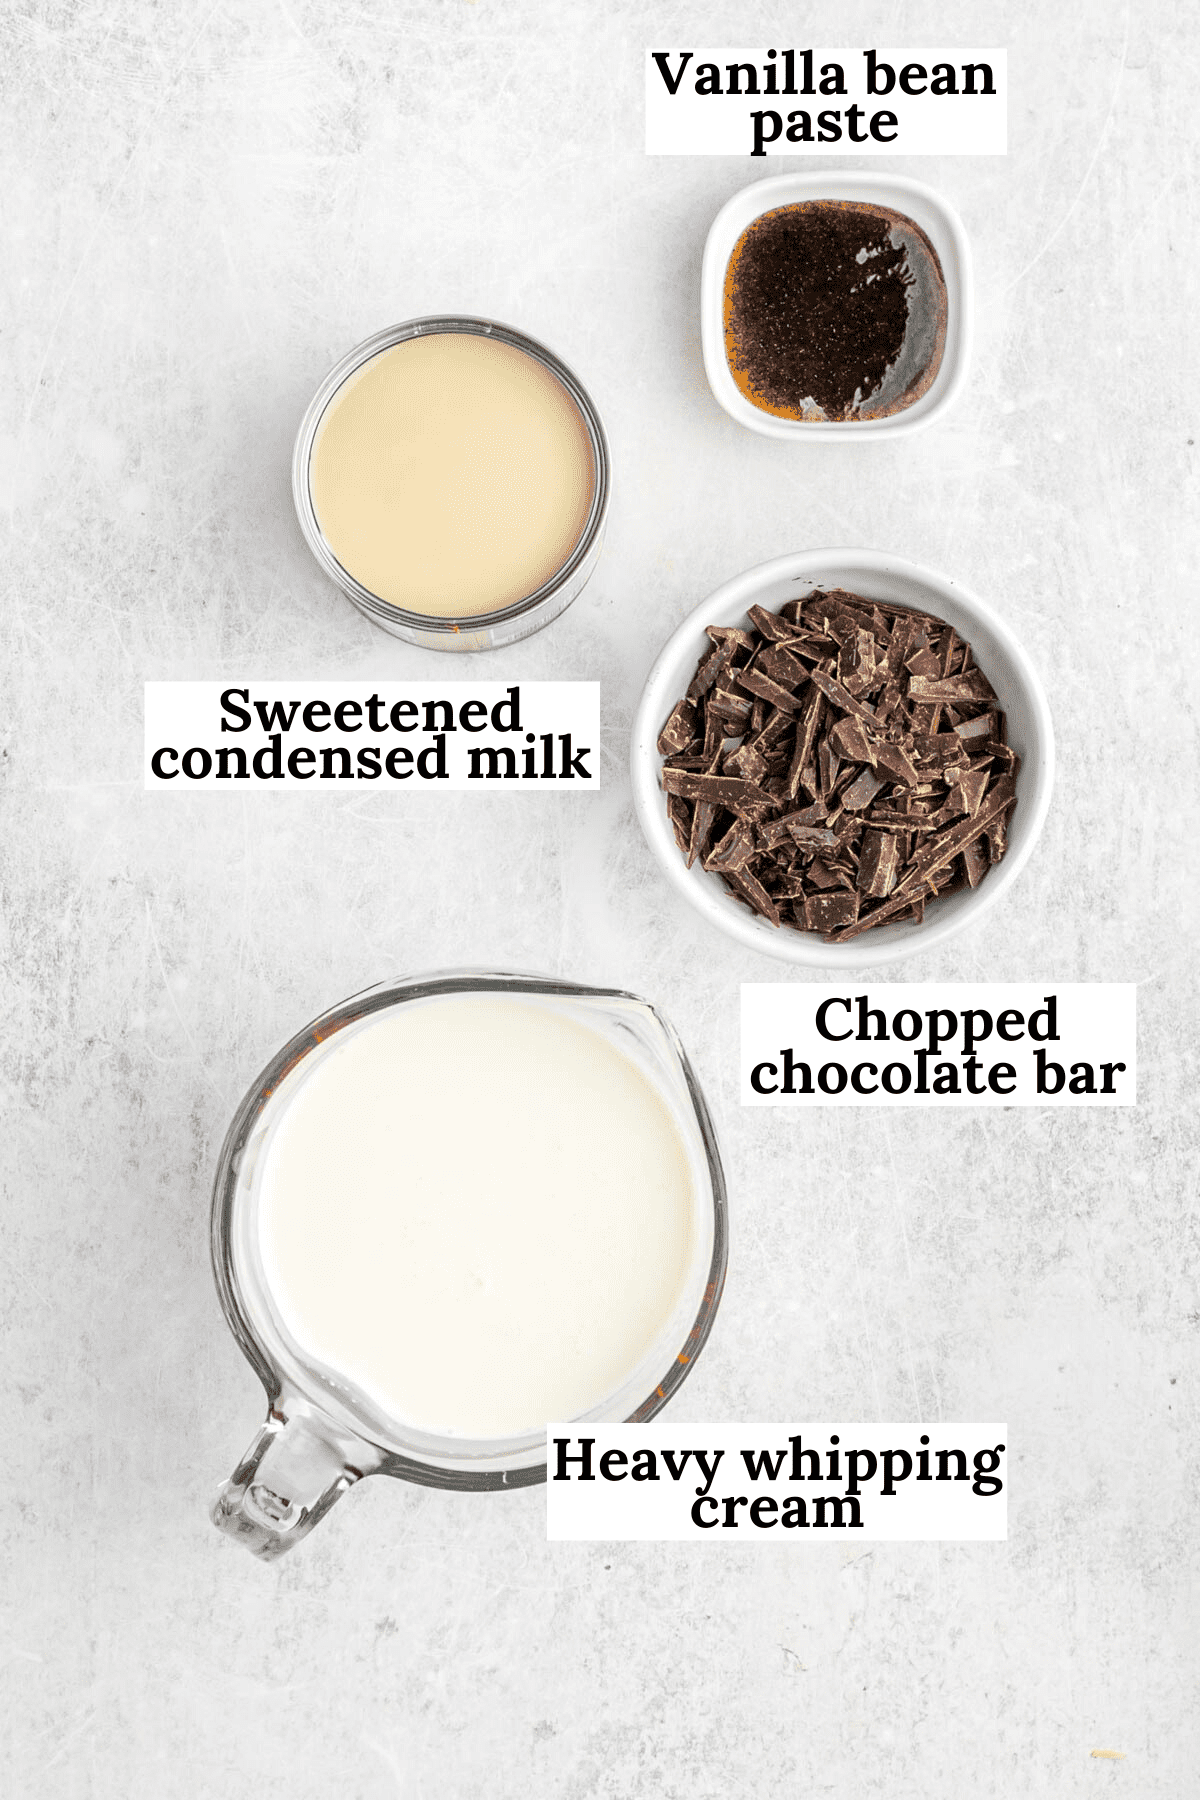 ingredients to make chocolate chip ice cream with overlay text